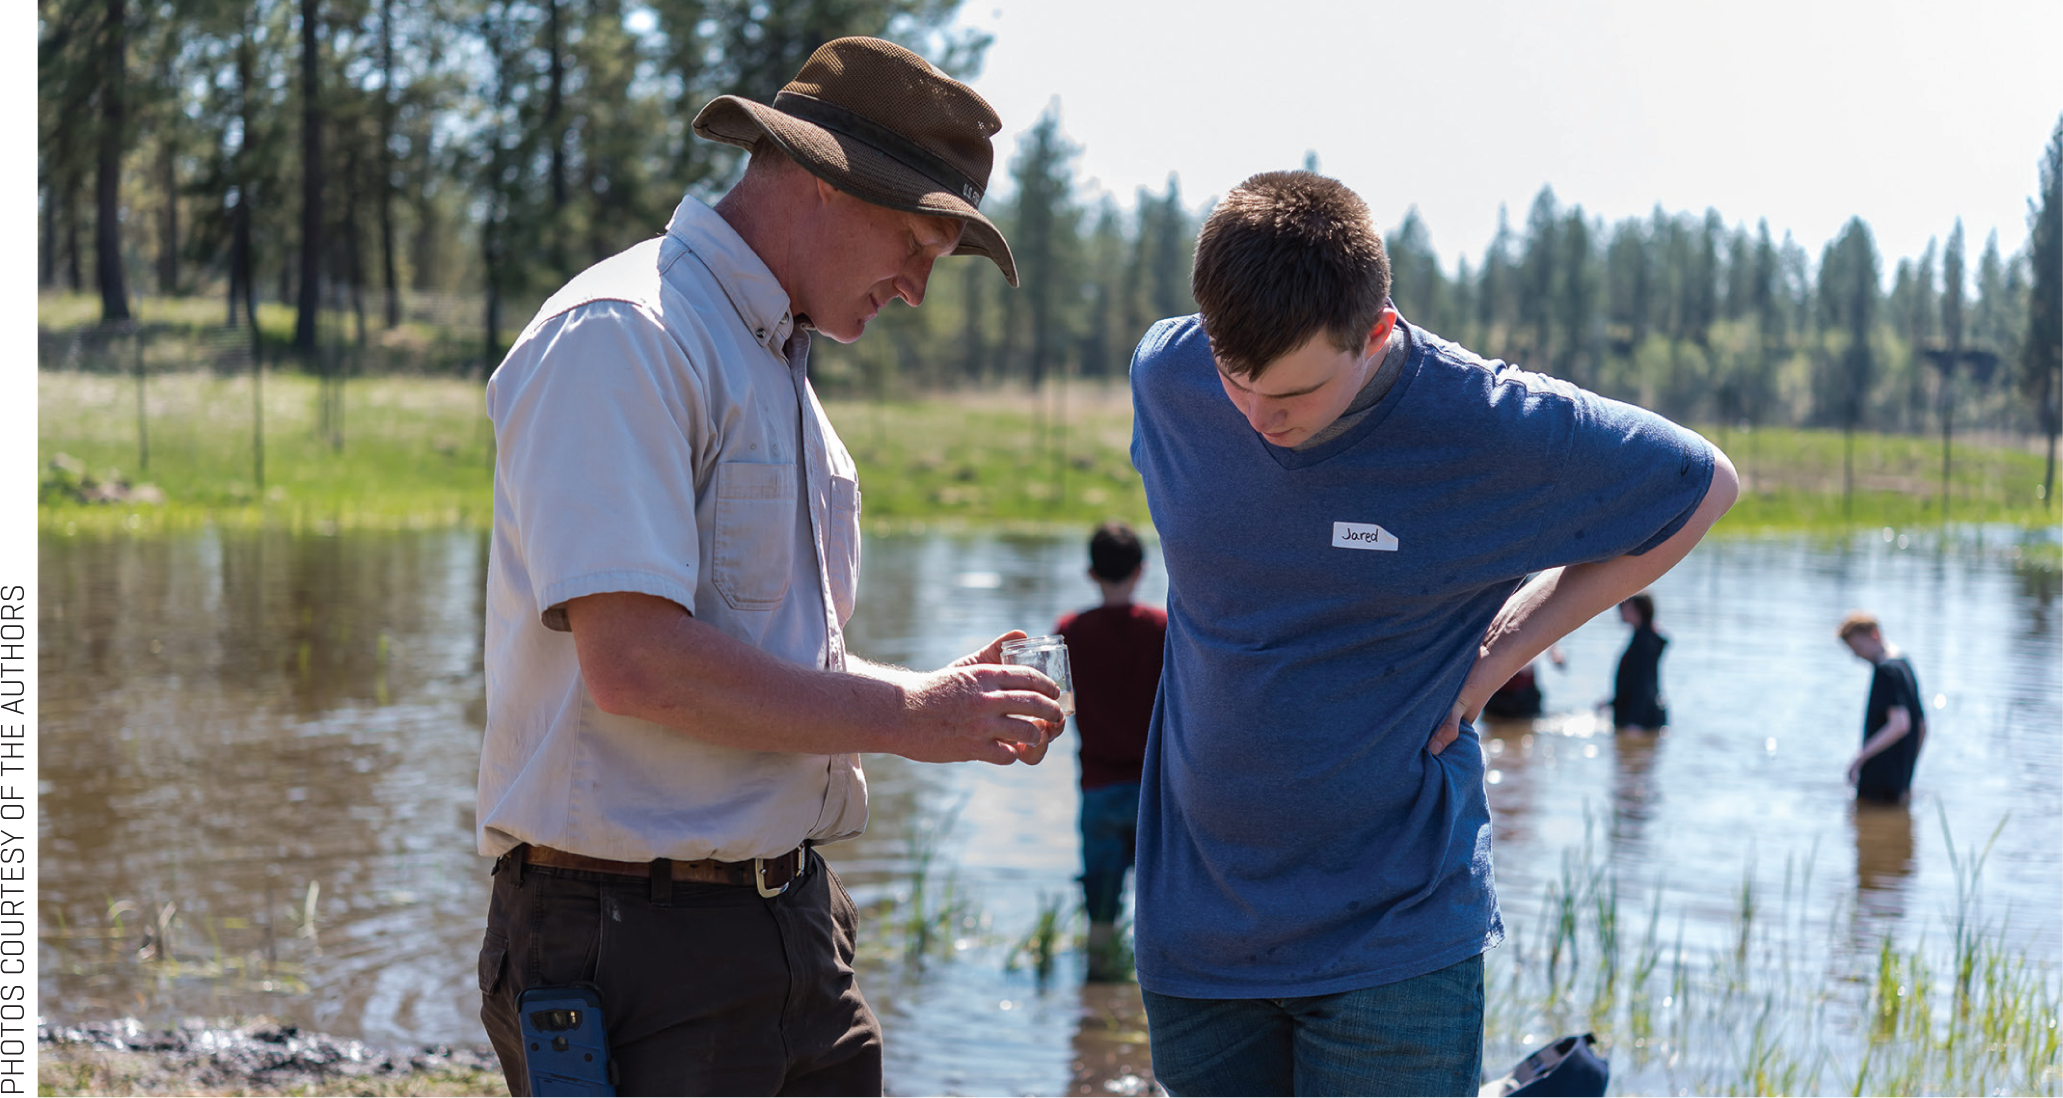 Partners for Fish and Wildlife biologist, Brian Walker, shares macroinvertebrates with curious student (photo by Bridget Mayfield, Pescado Lago Studios).